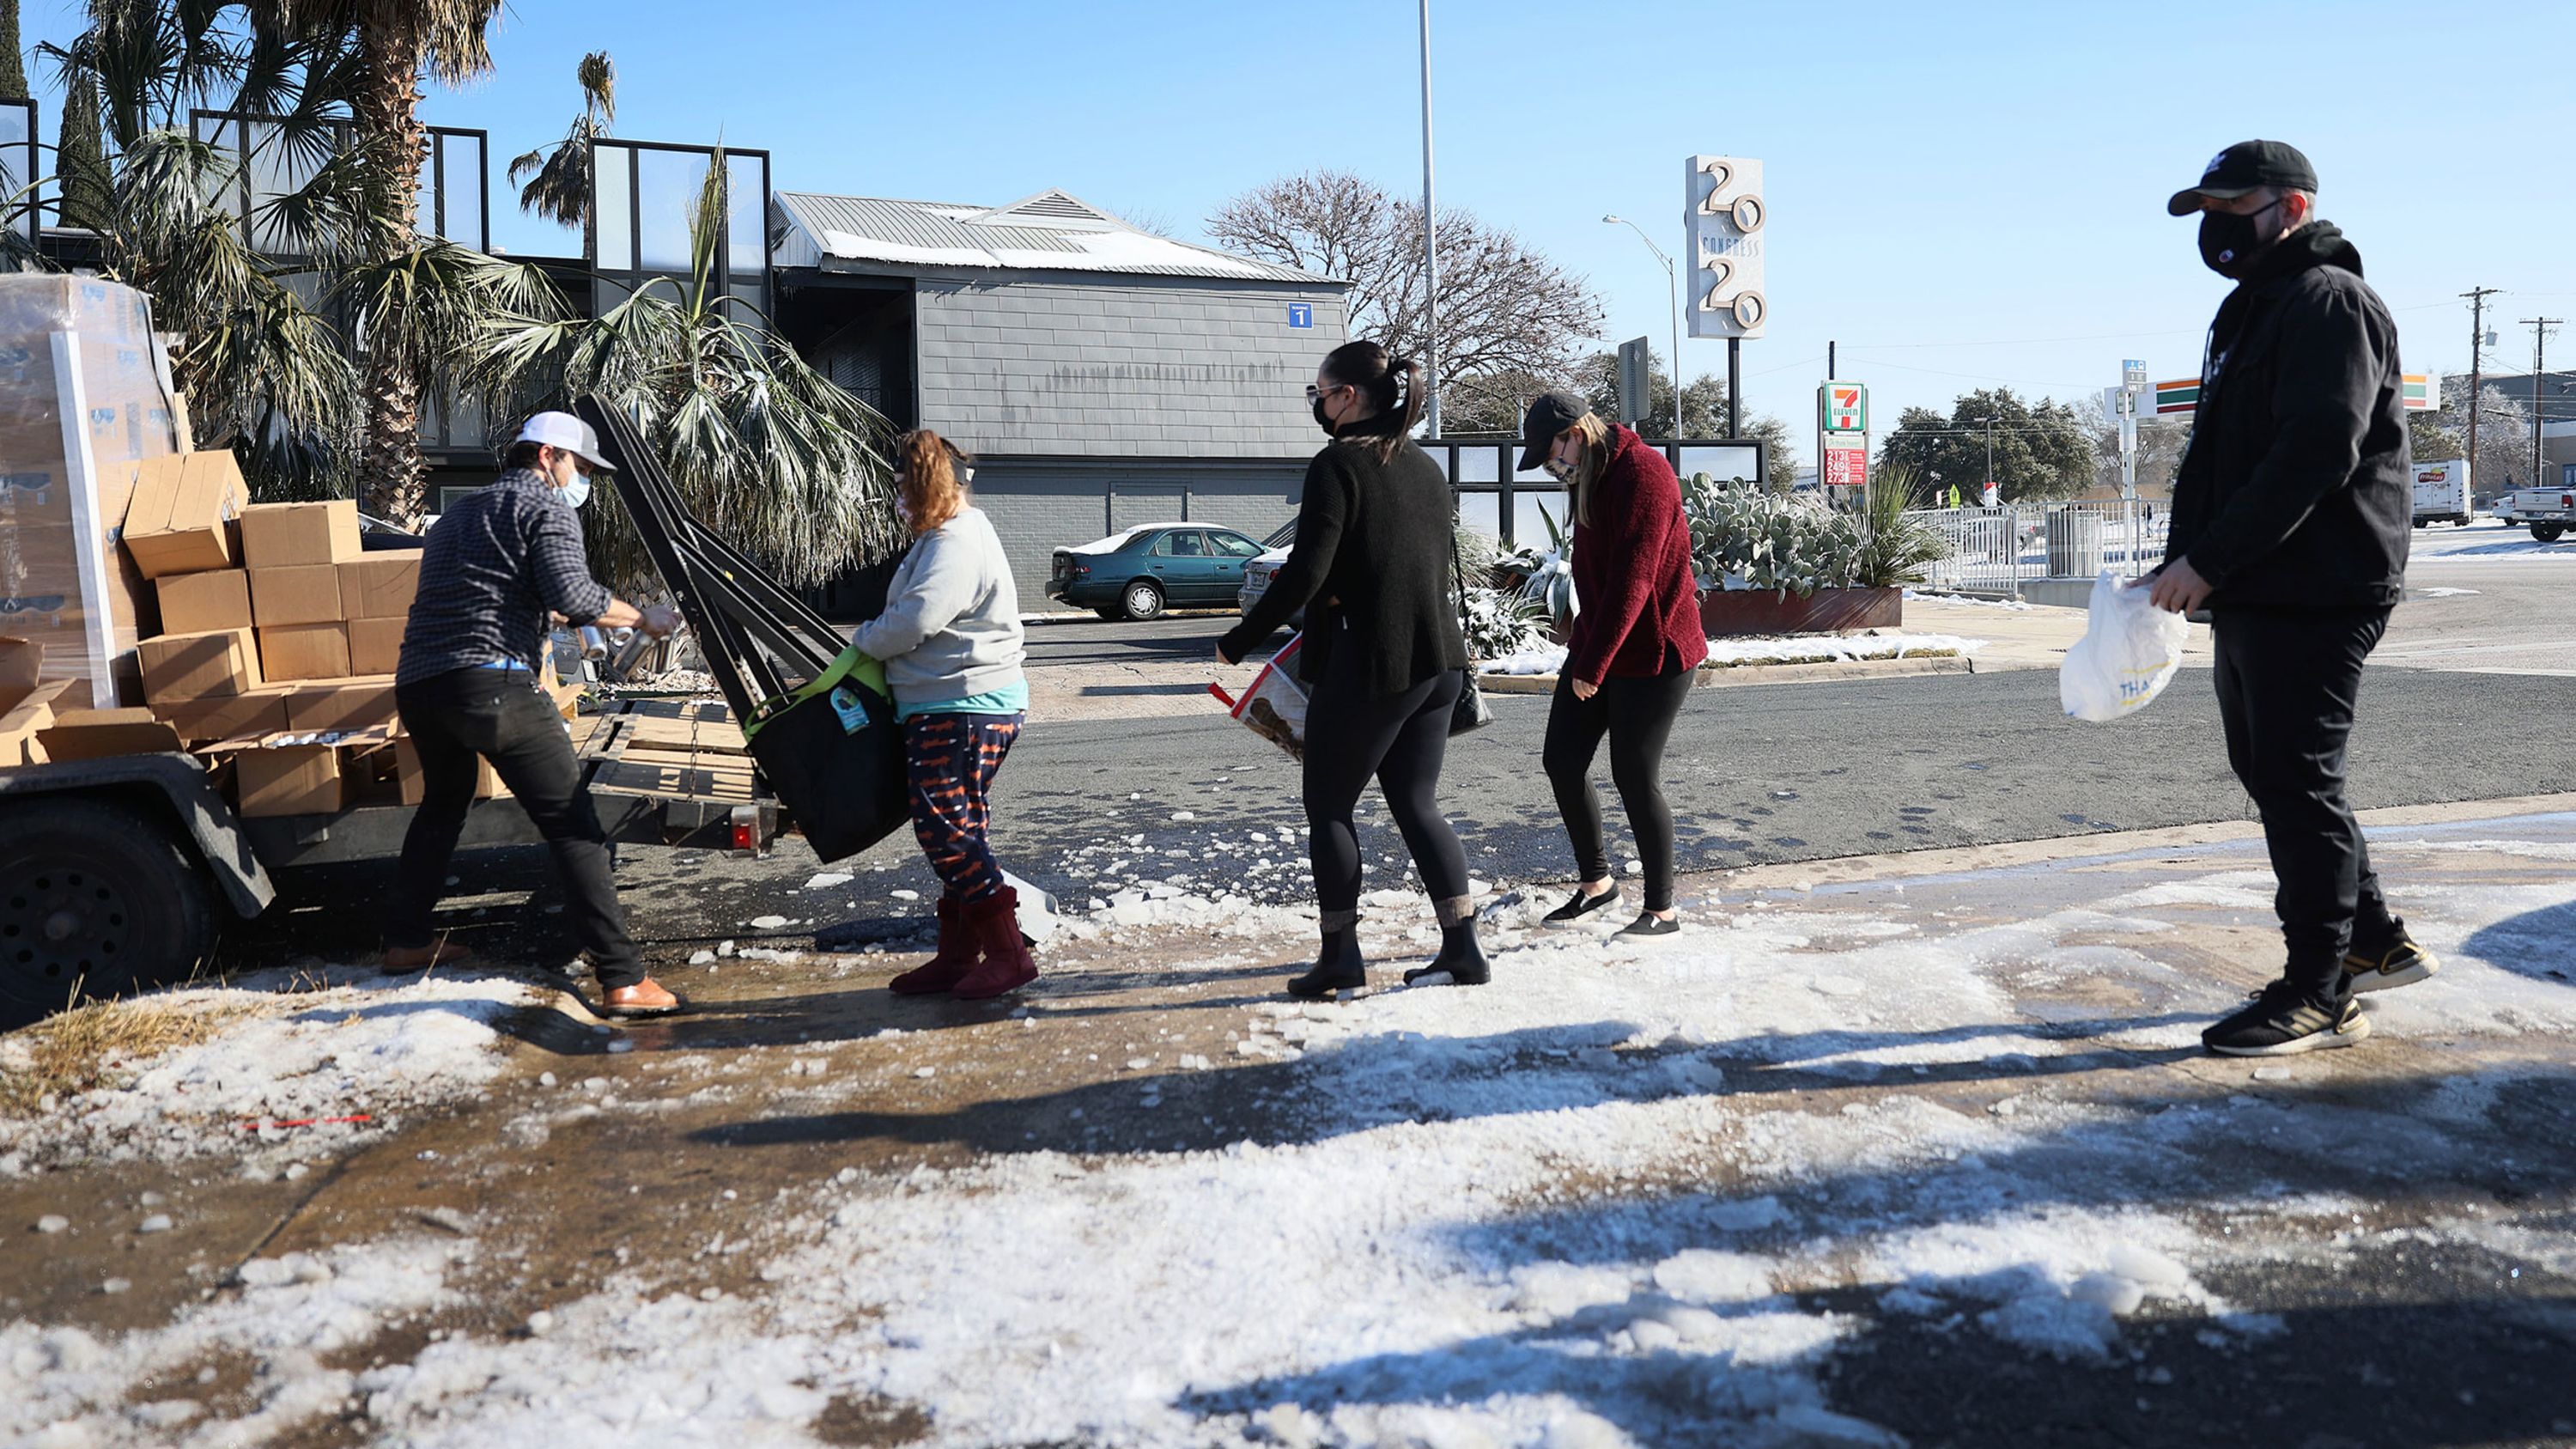 Austin's struggled to shelter homeless folks in cold weather in